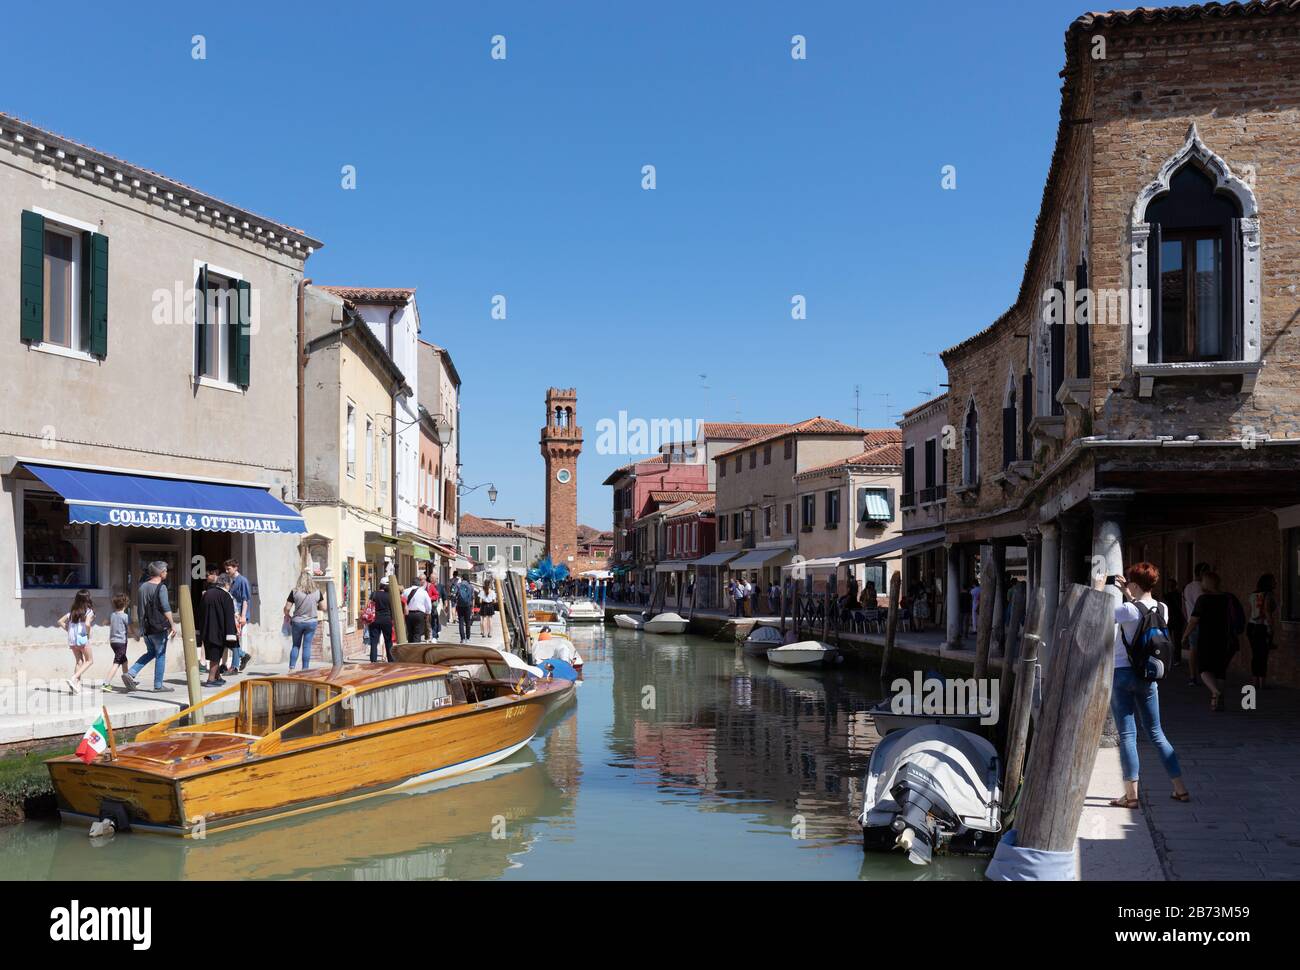 Typical canal scene, Murano, Province of Venice, Italy, Stock Photo